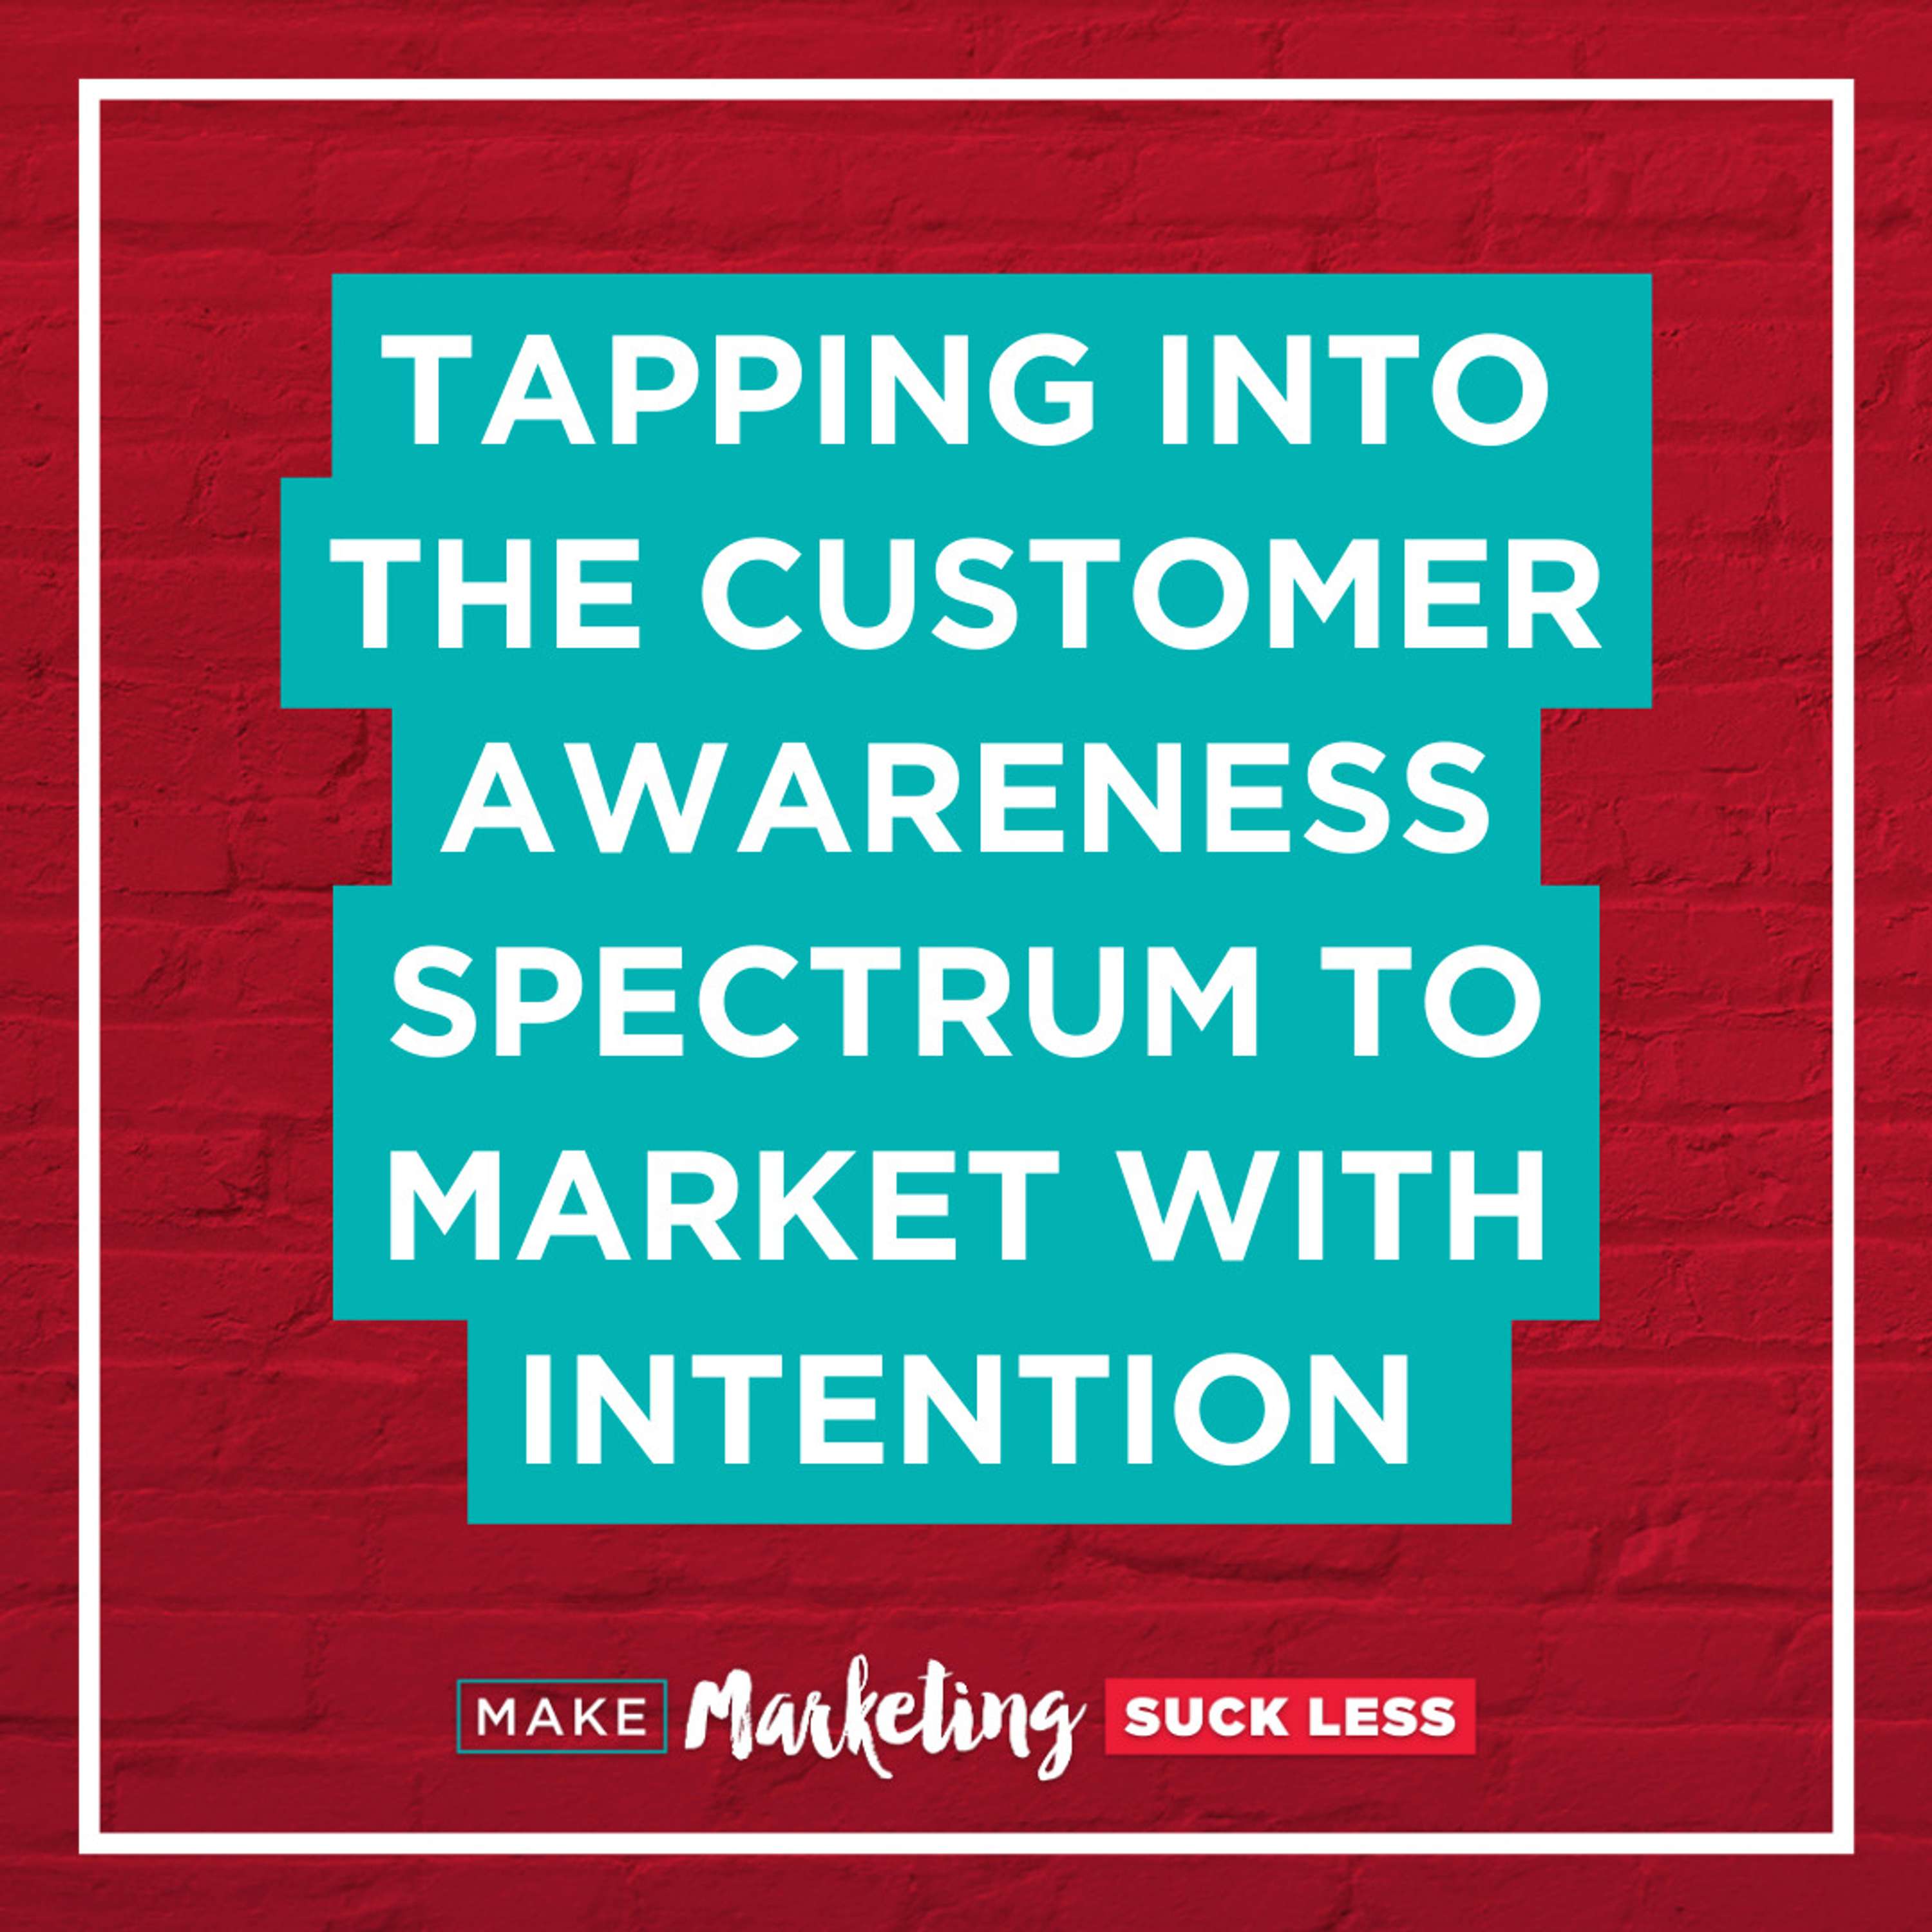 Tapping Into The Customer Awareness Spectrum To Market With Intention